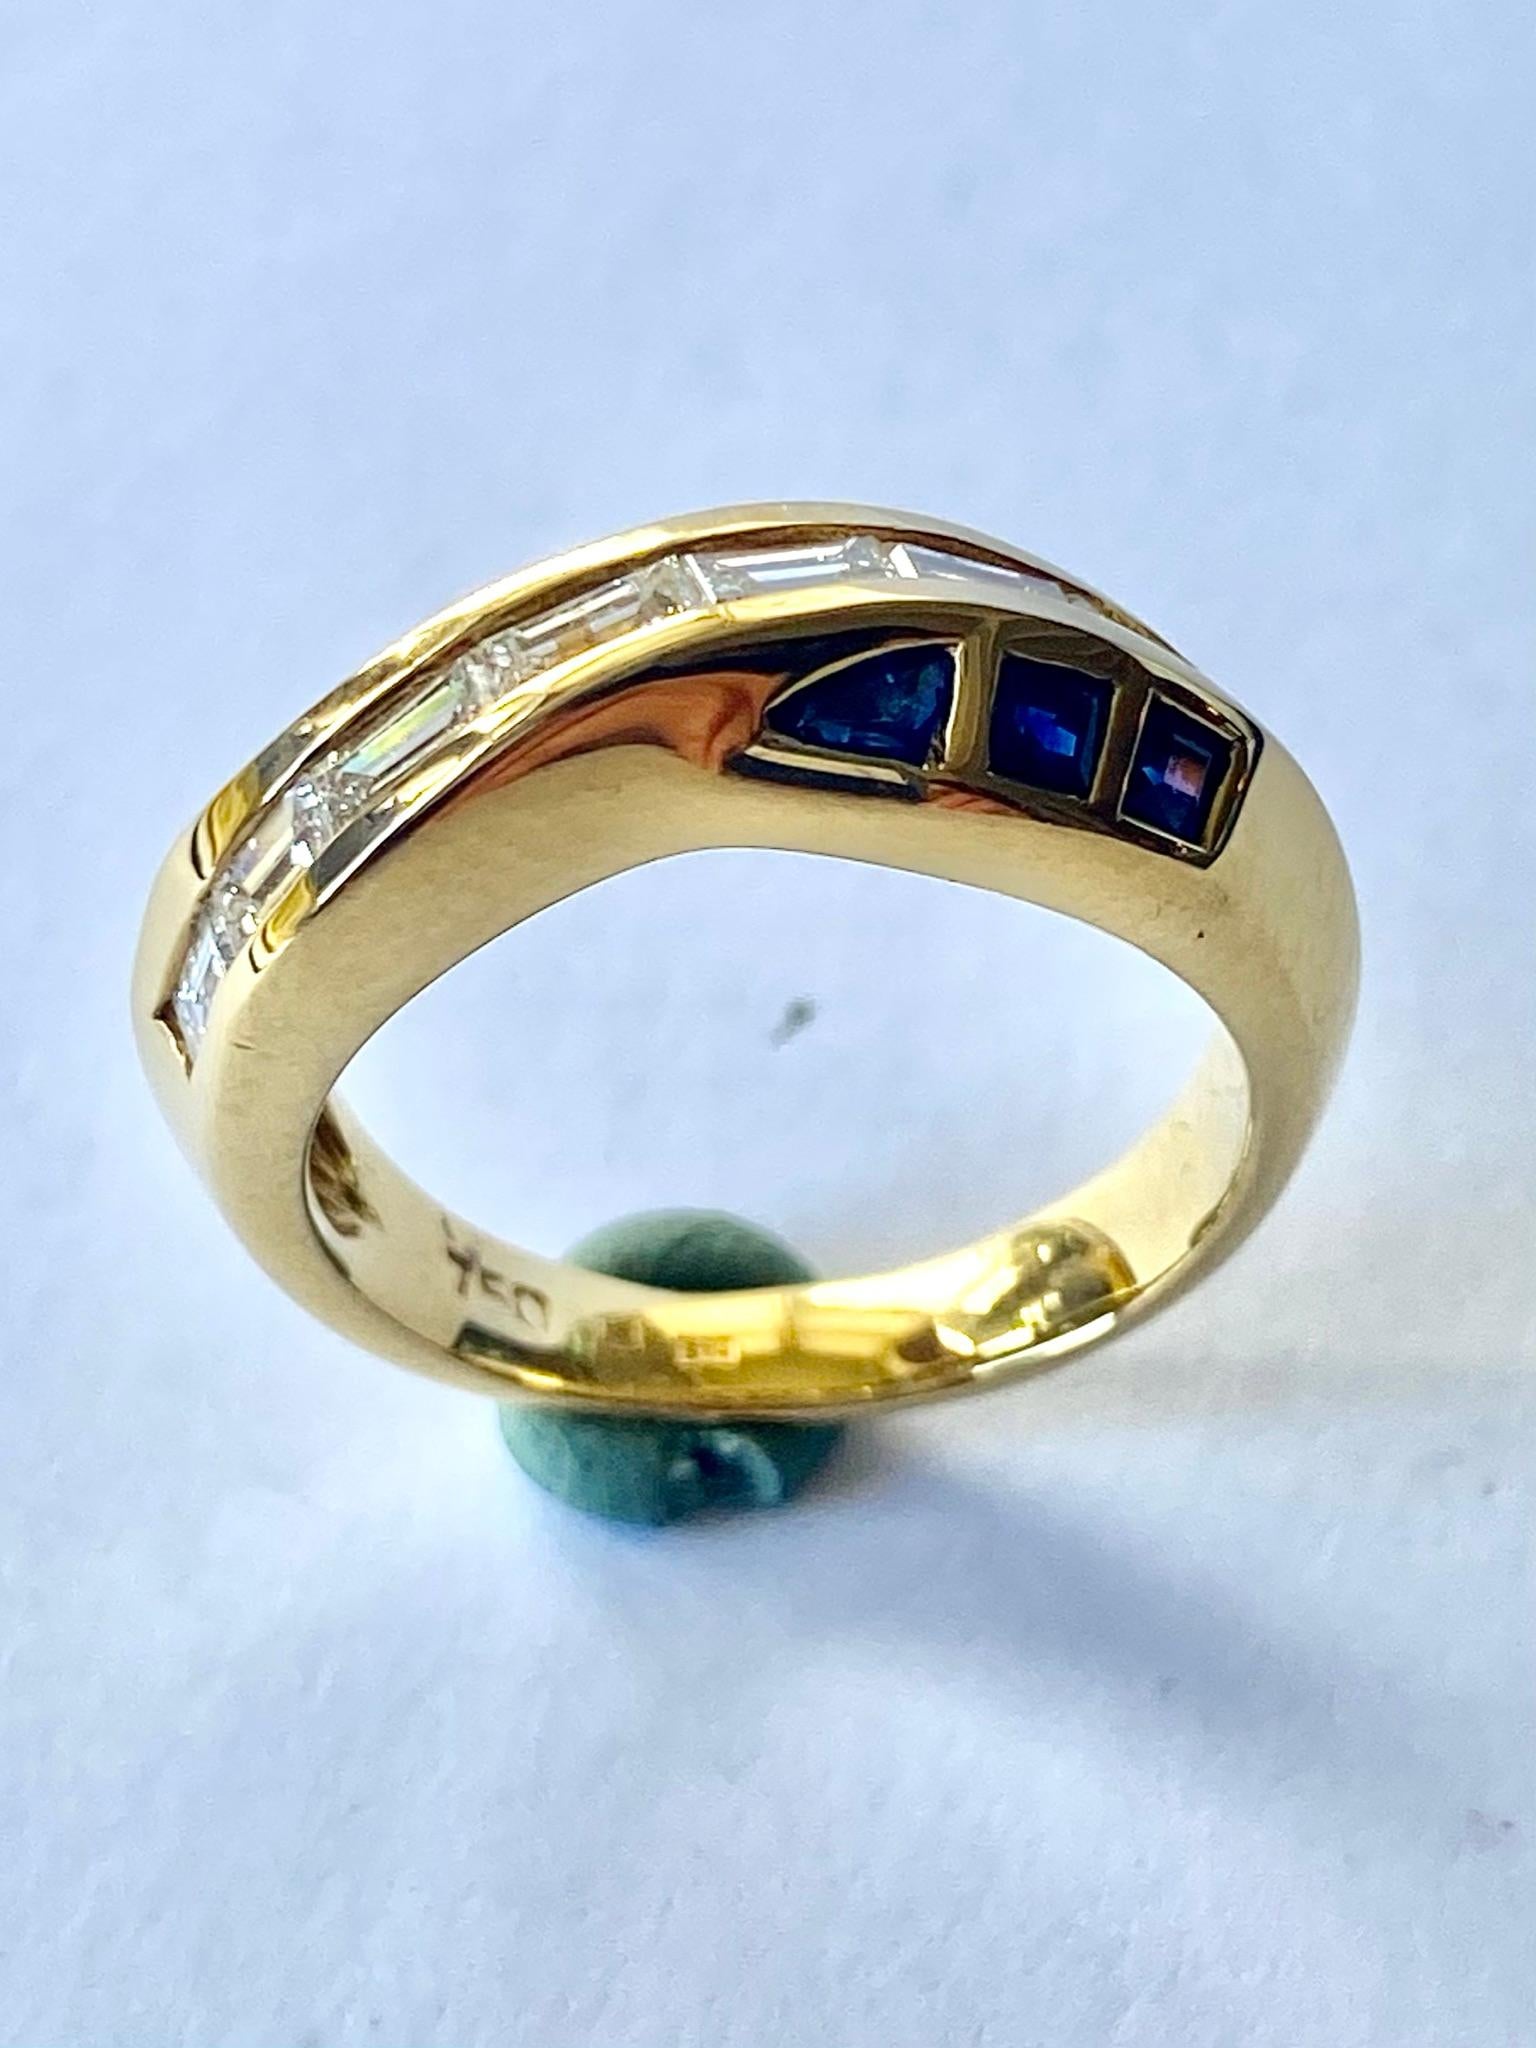 One (1) 18 Karat Yellow Gold Ring, Stamped  750 and SV+ = Vaessen jeweler Holland
set with:
Six (6) Triangle Cut Sapphires adn Seven (7) Baquette Cut Diamonds
Sapphires 0.50 ct.
Diamaonds: 0.60 ct. VVS - F-G
Total Wreight: 6.92 grams.
Sice of the